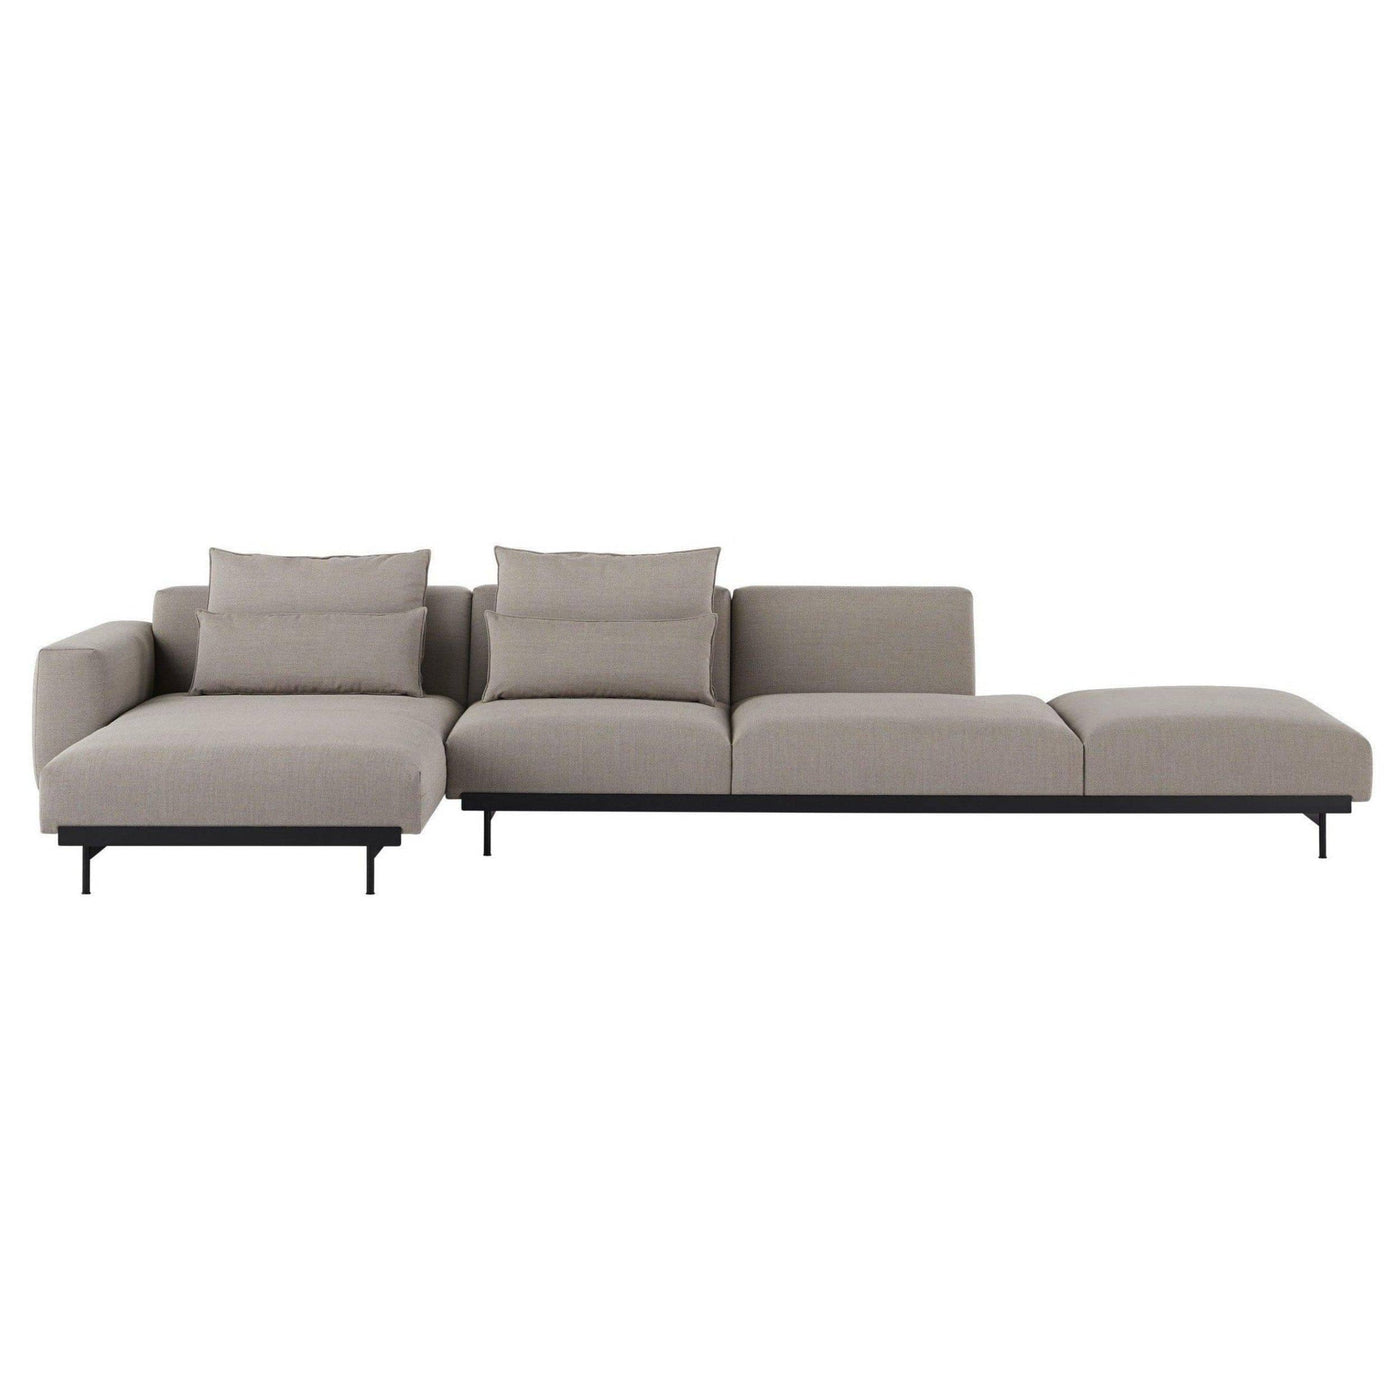 Muuto In Situ Modular 4 Seater Sofa configuration 5. Made to order from someday designs. #colour_fiord-262